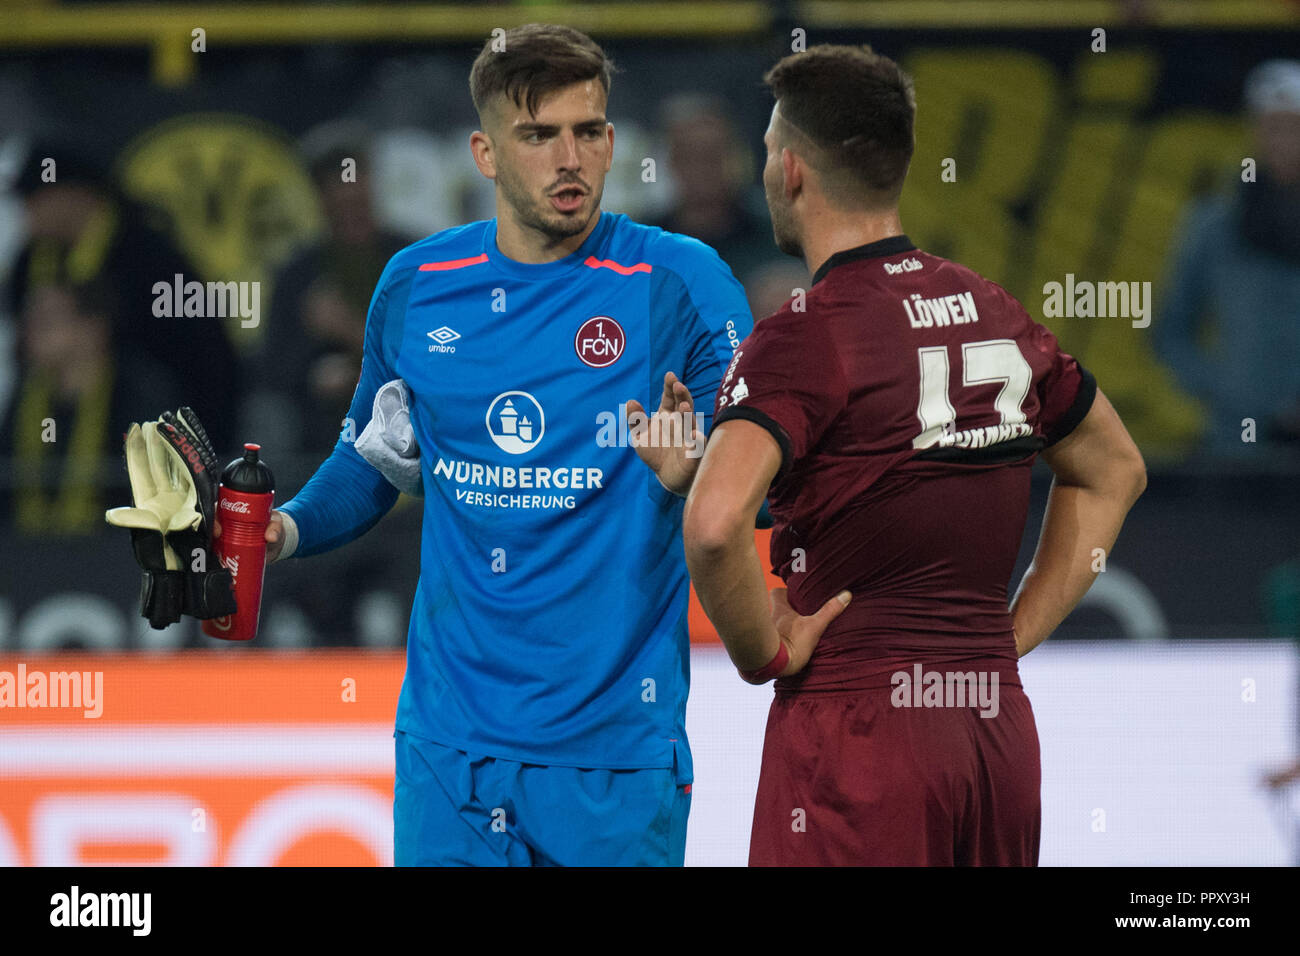 Dortmund, Deutschland. 27th Sep, 2018. Eduard LOEWEN (right, Lv? Wen, N) and goalkeeper Fabian BREDLOW (N) talking after the final whistle witheinander, frustratedriert, frustrated, verbatized, disappointed, disappointed, disappointment, disappointment, sad, half figure, half figure, gesture, gesture, Soccer 1. Bundesliga, 5. matchday, Borussia Dortmund (DO) - FC Nuremberg (N) 7: 0, on 26/09/2018 in Dortmund/Germany. ¬ | usage worldwide Credit: dpa/Alamy Live News Stock Photo